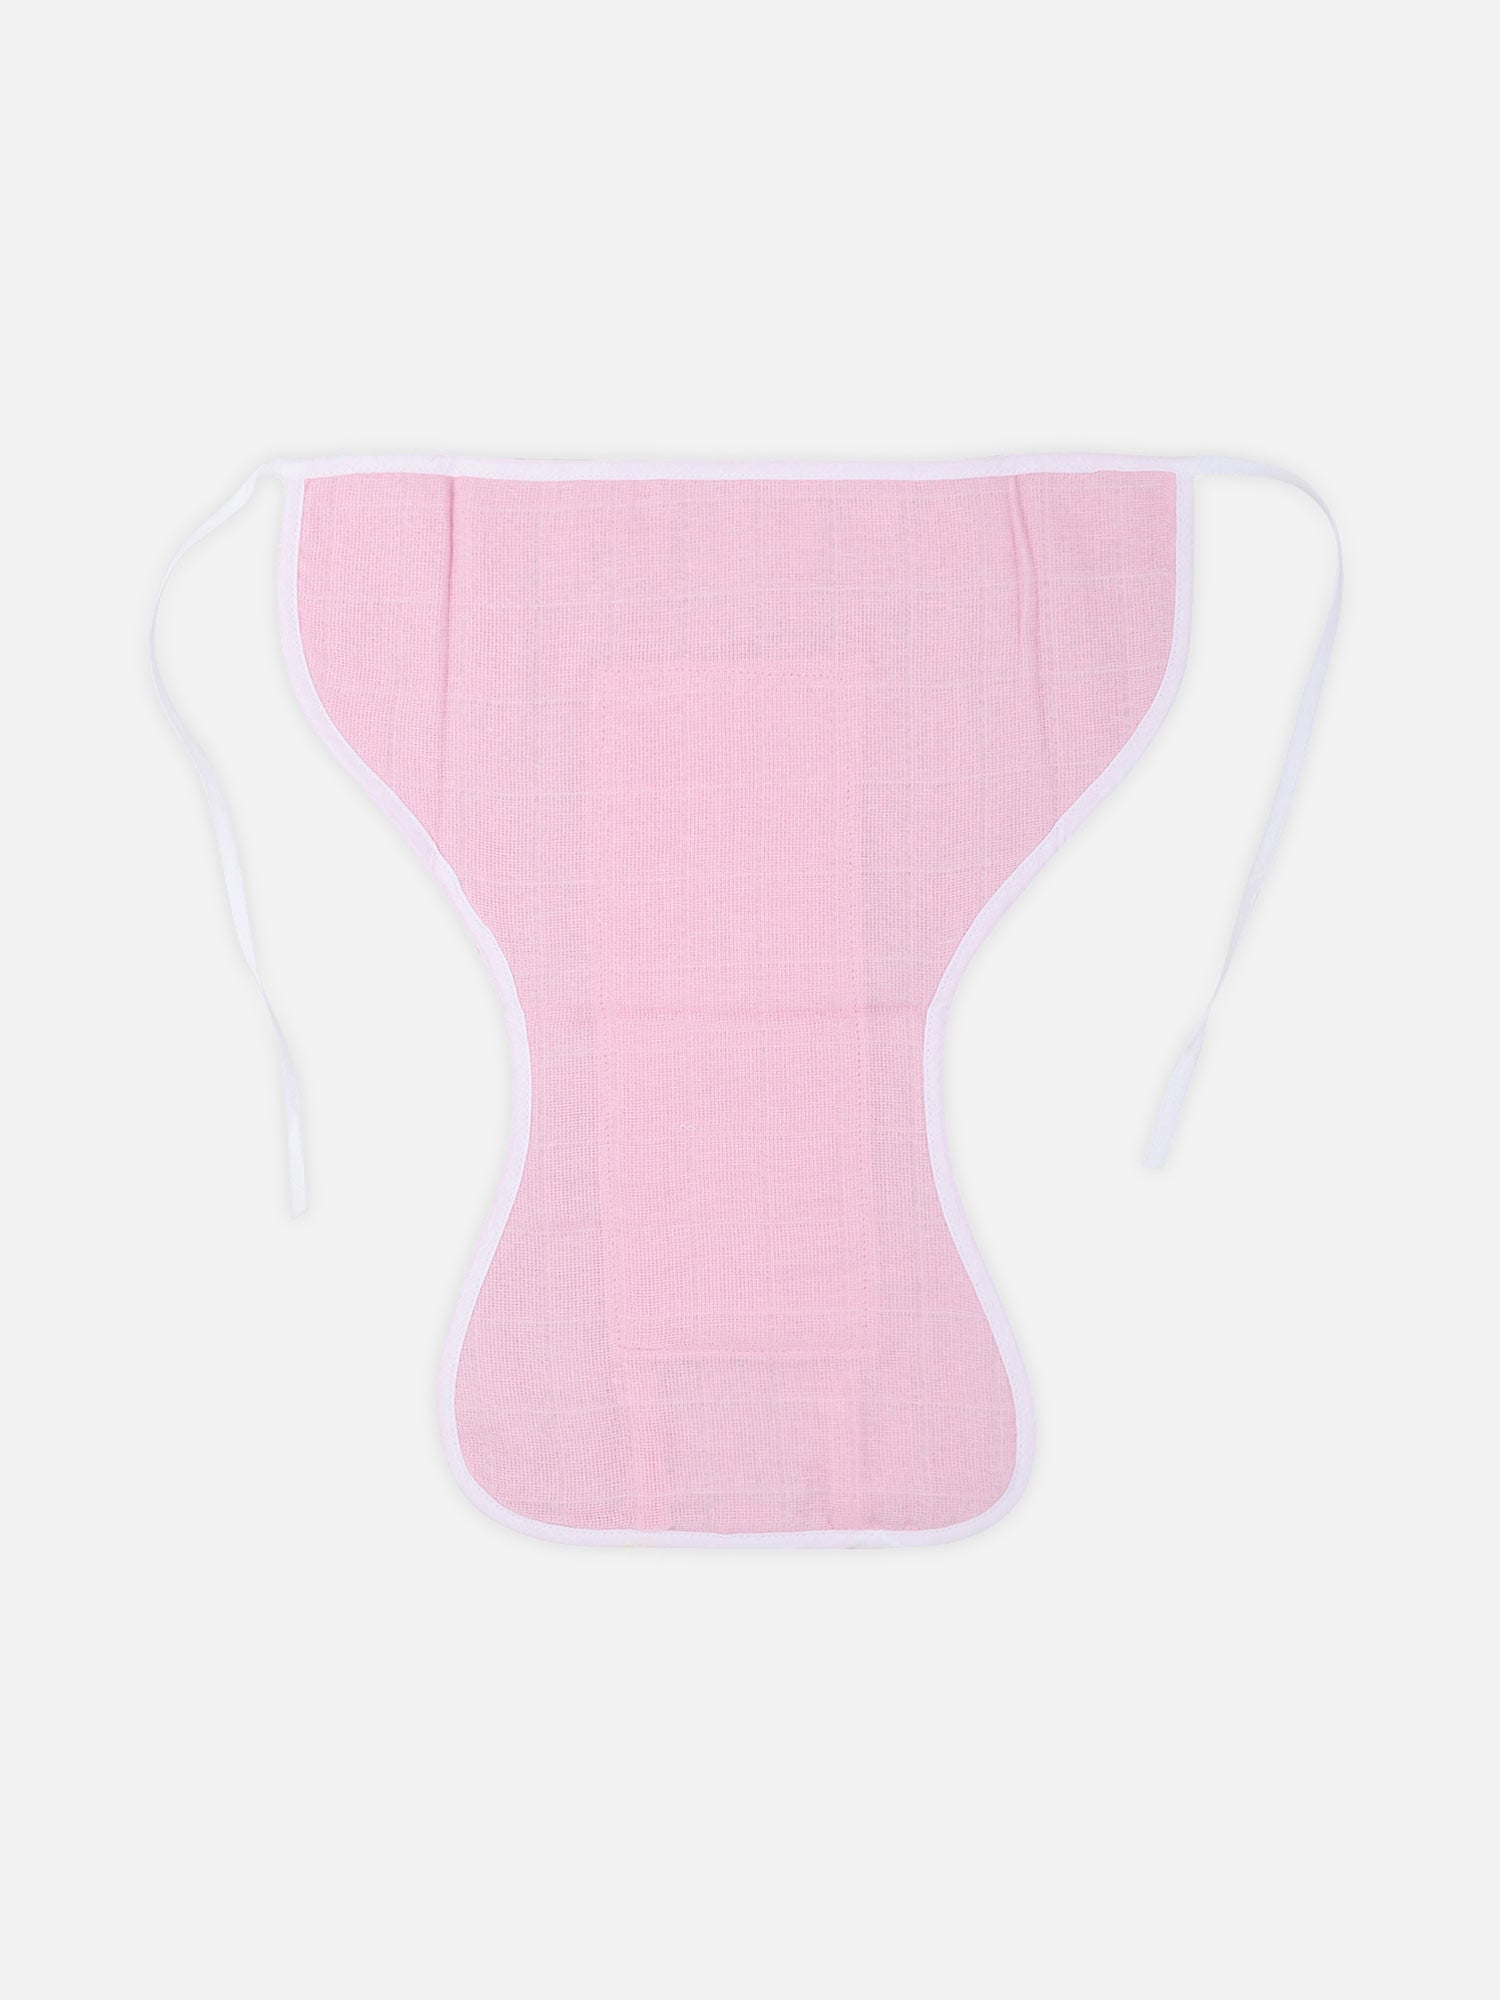 Oh Baby Plain Round Nappies Pink - Rdpl